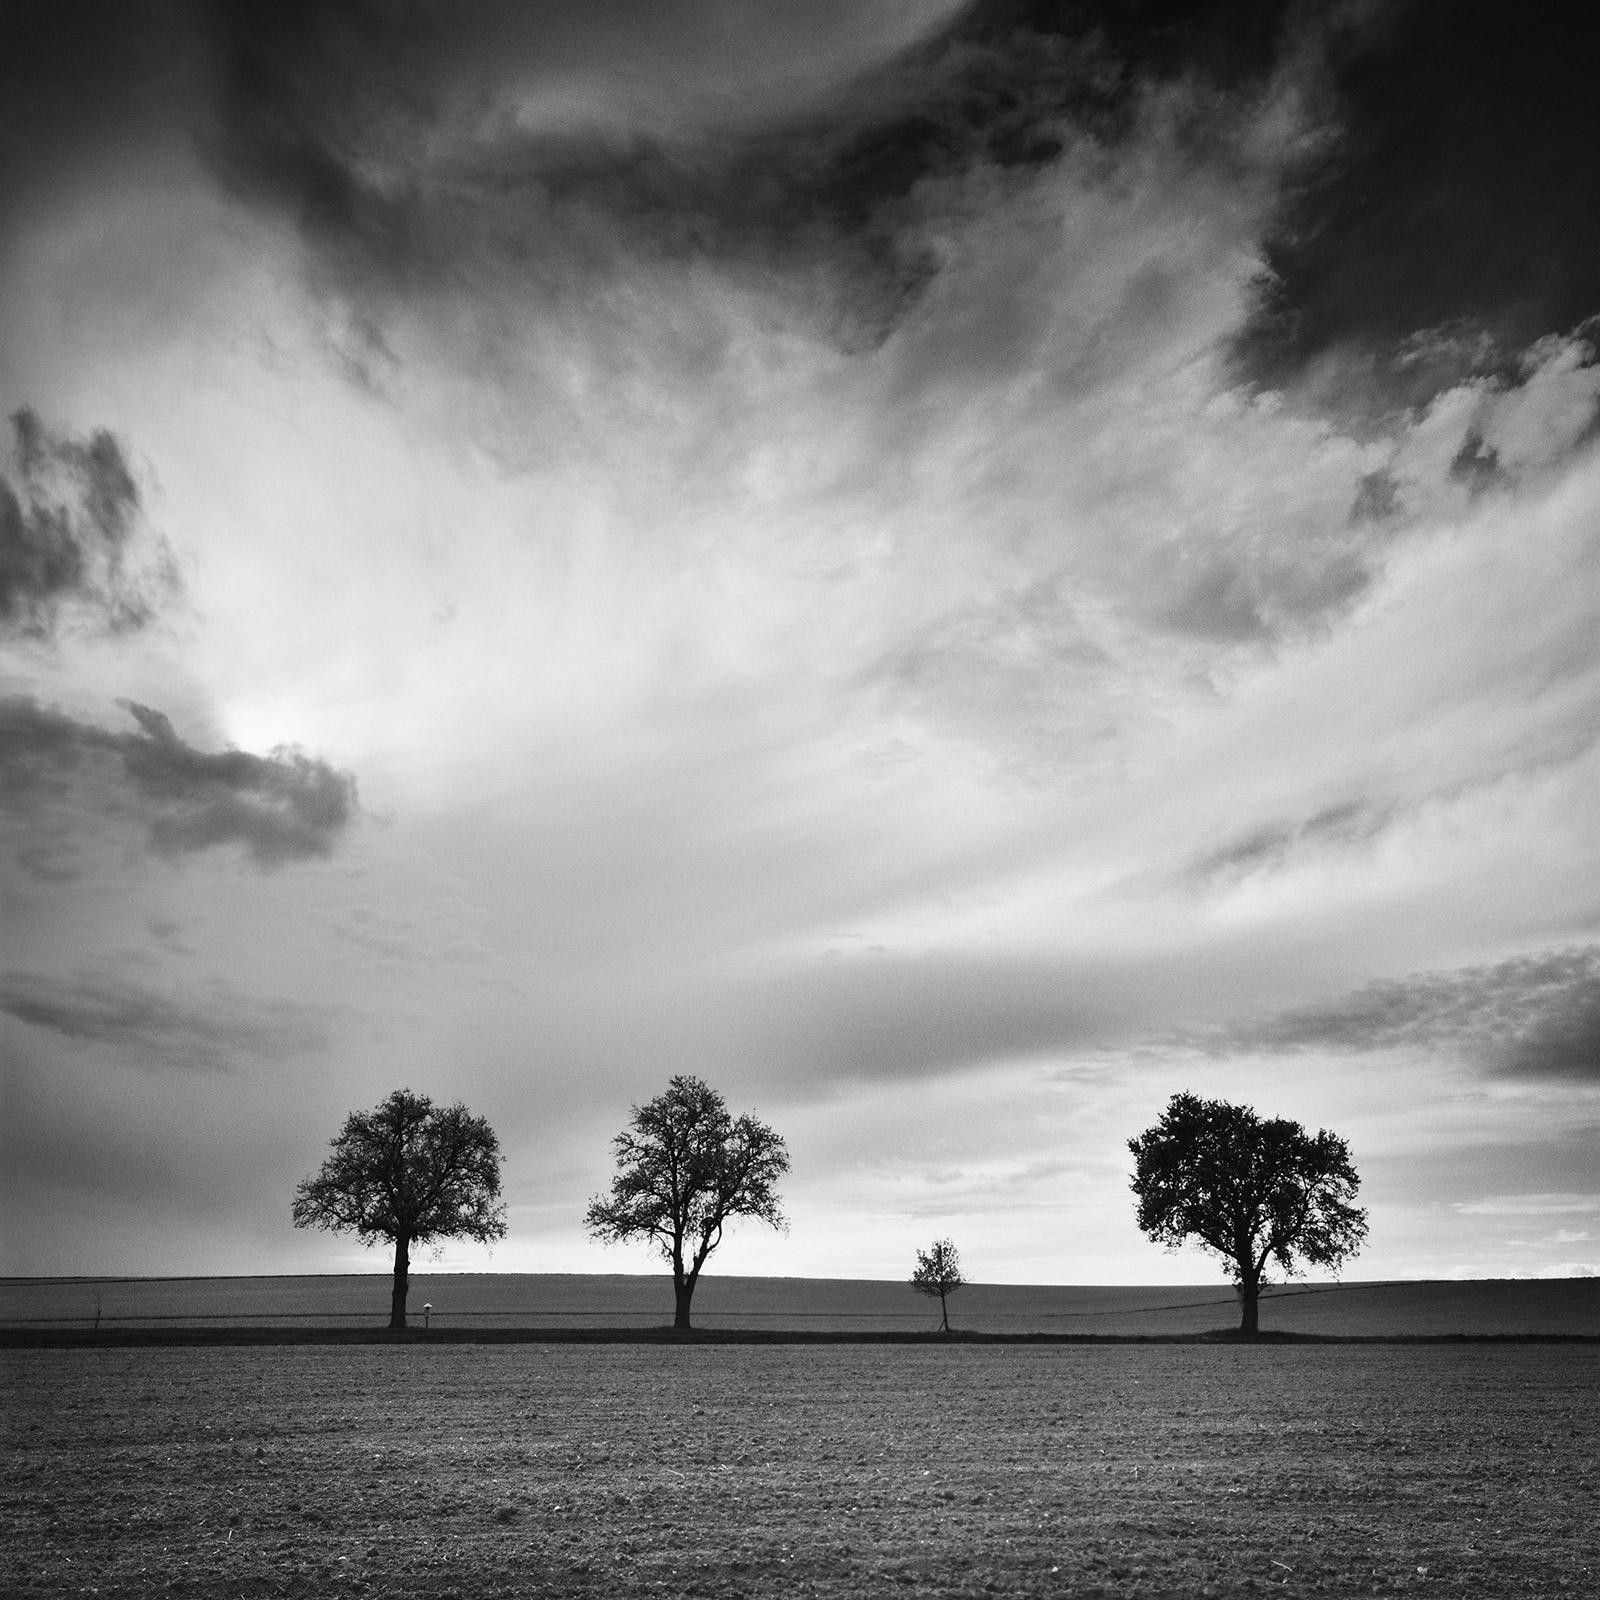 Gerald Berghammer Landscape Photograph - Three and a half Tree, very cloudy, storm, black and white landscape photography